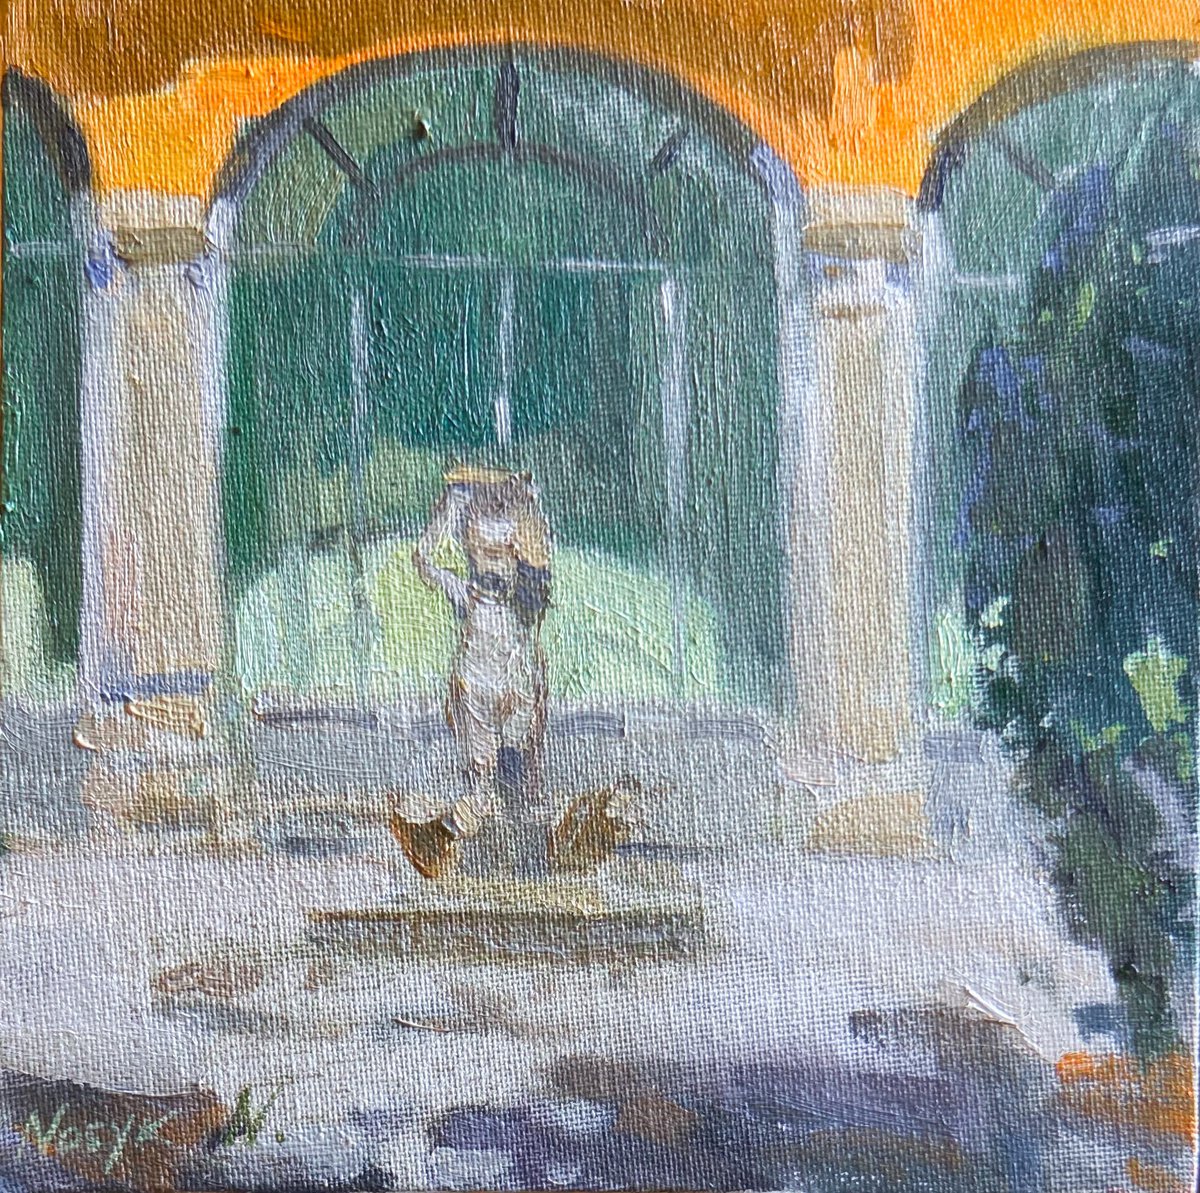 Fountain in Ternate, Italy 20x20 cm| oil painting on canvas by Nataliia Nosyk